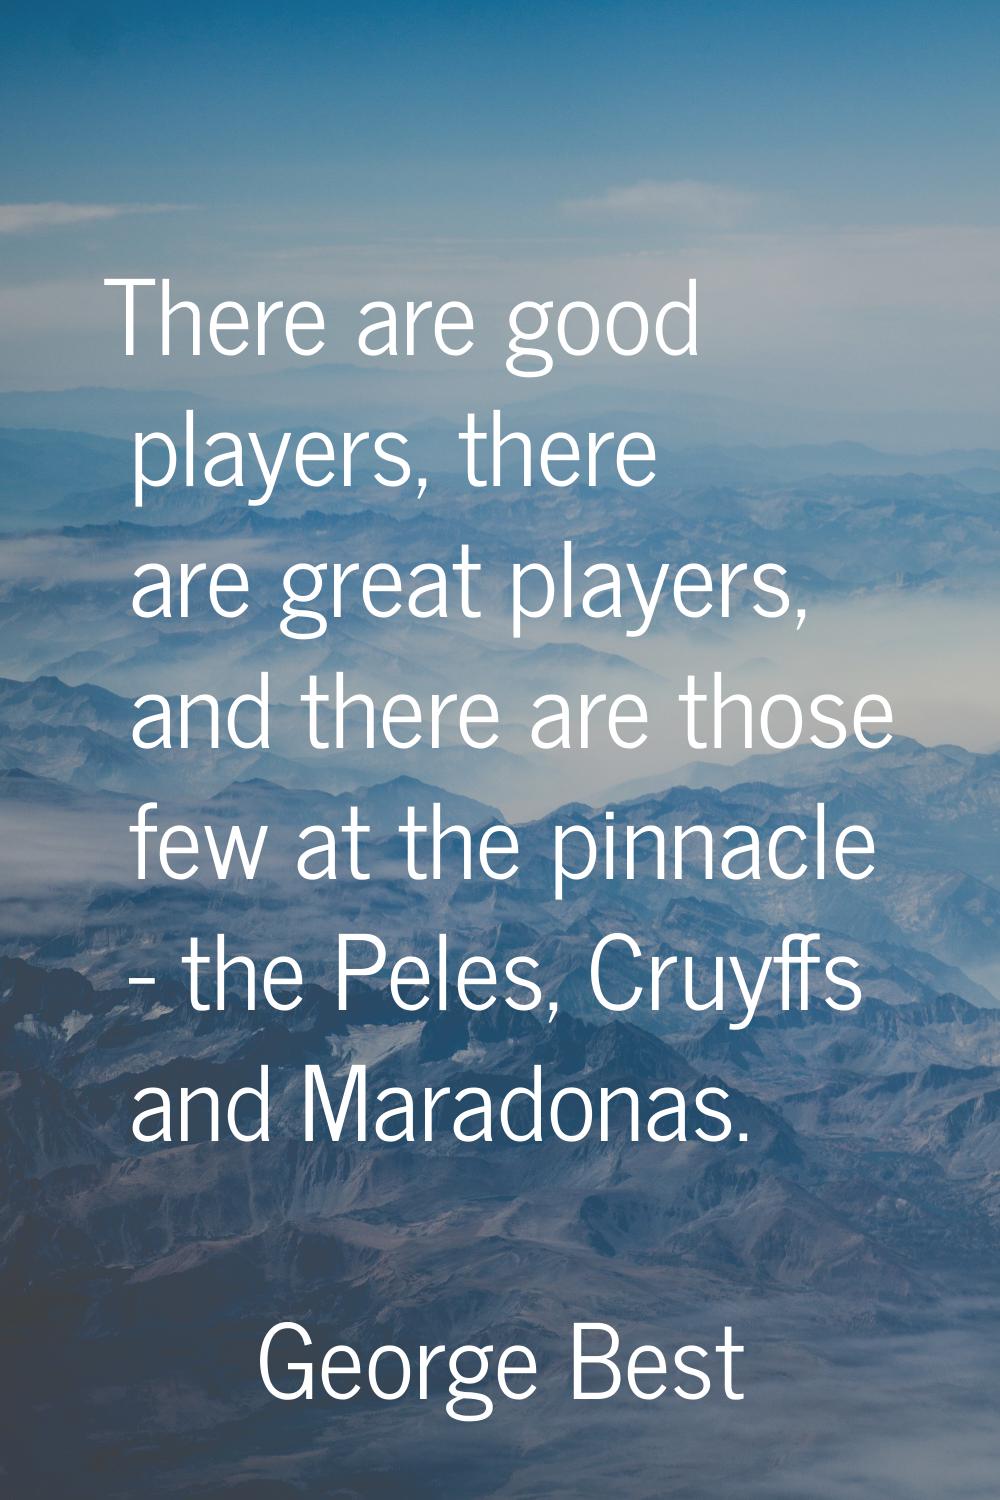 There are good players, there are great players, and there are those few at the pinnacle - the Pele